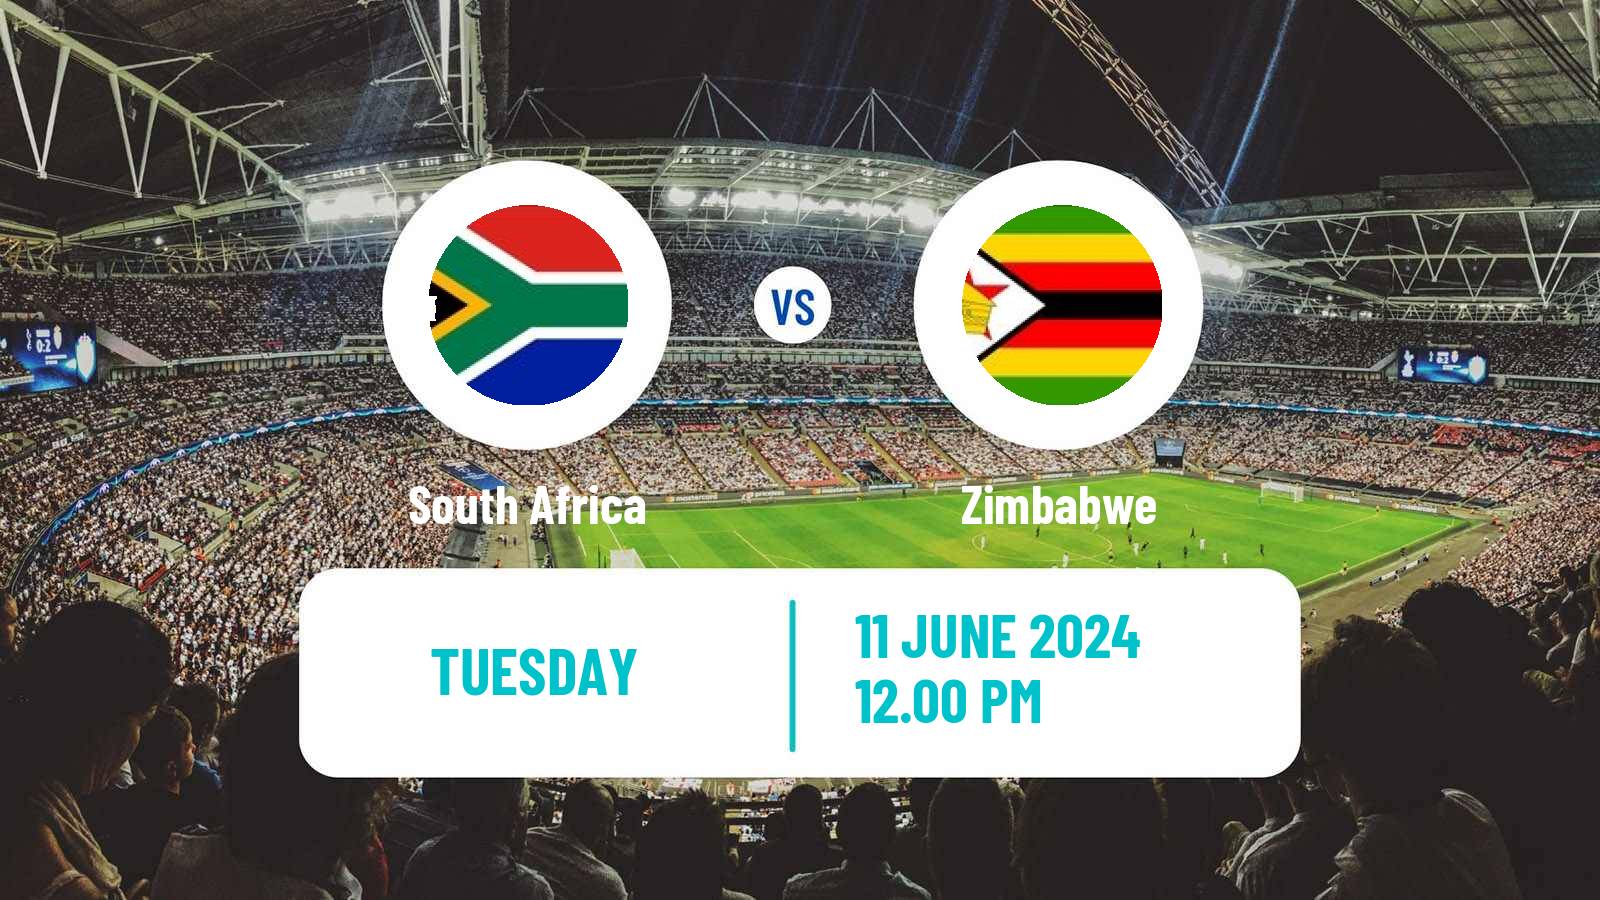 Soccer FIFA World Cup South Africa - Zimbabwe